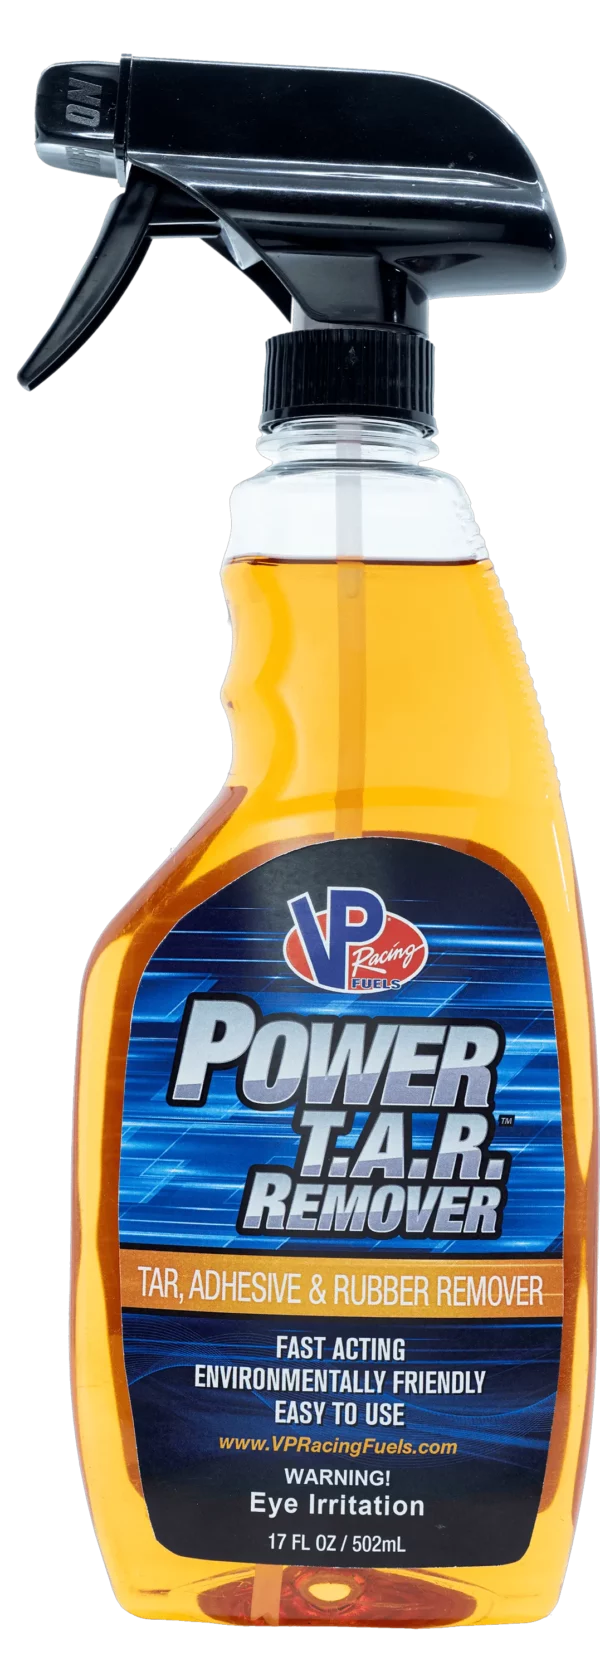 VP Racing Power T.A.R. Remover, 17 ounce spray bottle. Removes tar, adhesive, and rubber from vehicles.